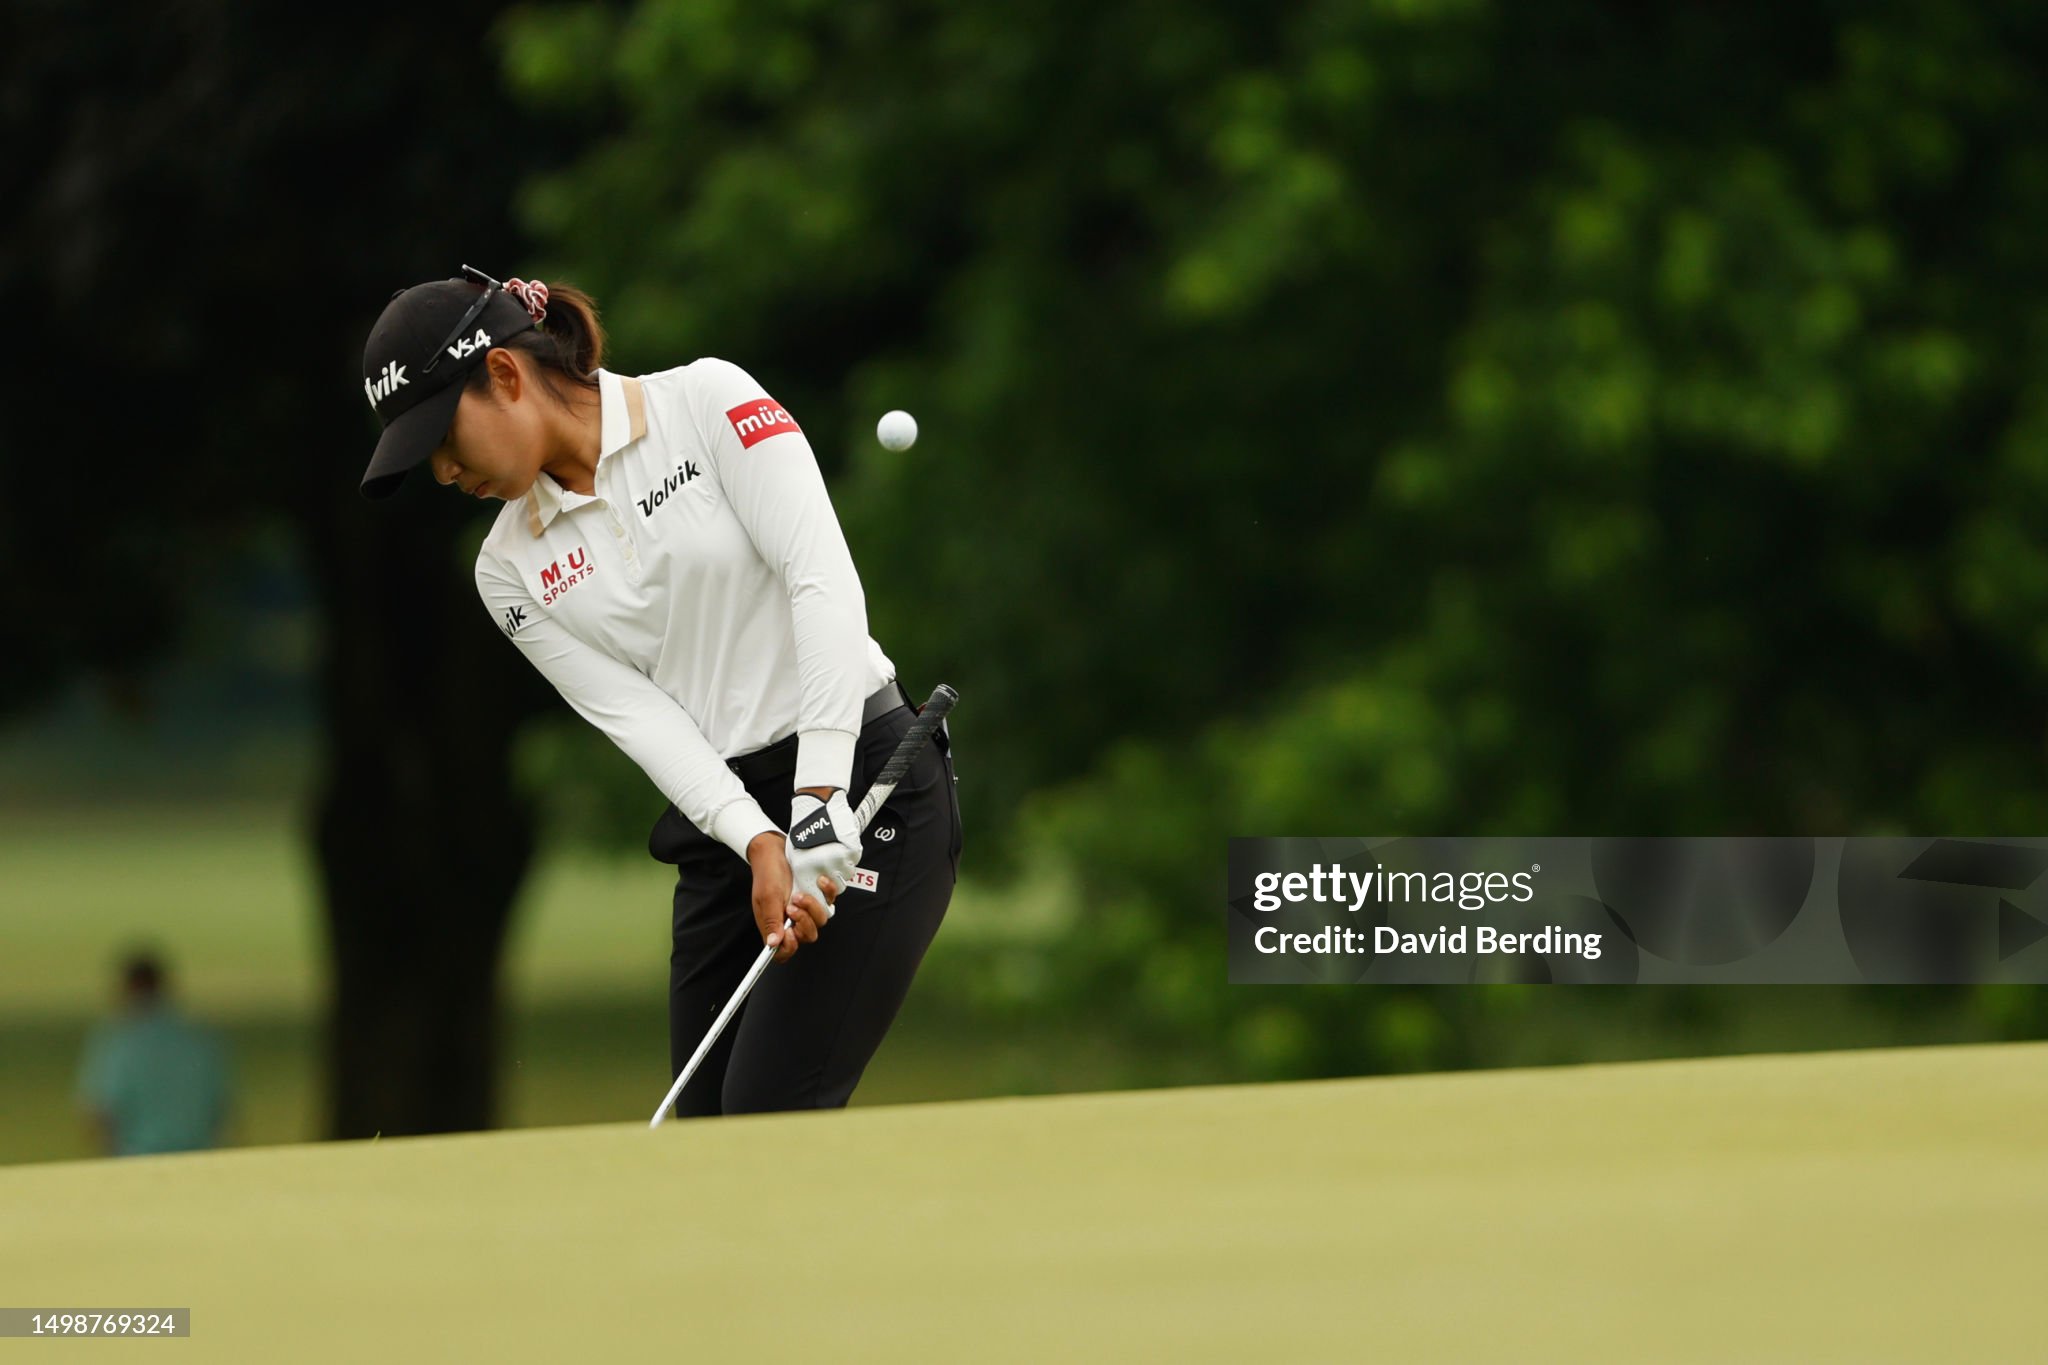 https://media.gettyimages.com/id/1498769324/photo/meijer-lpga-classic-for-simply-give-round-one.jpg?s=2048x2048&w=gi&k=20&c=my2uOwsL_Y6i3zVjpK0iO9Rk5ZRLzqkB_4KJ9N6I2kU=